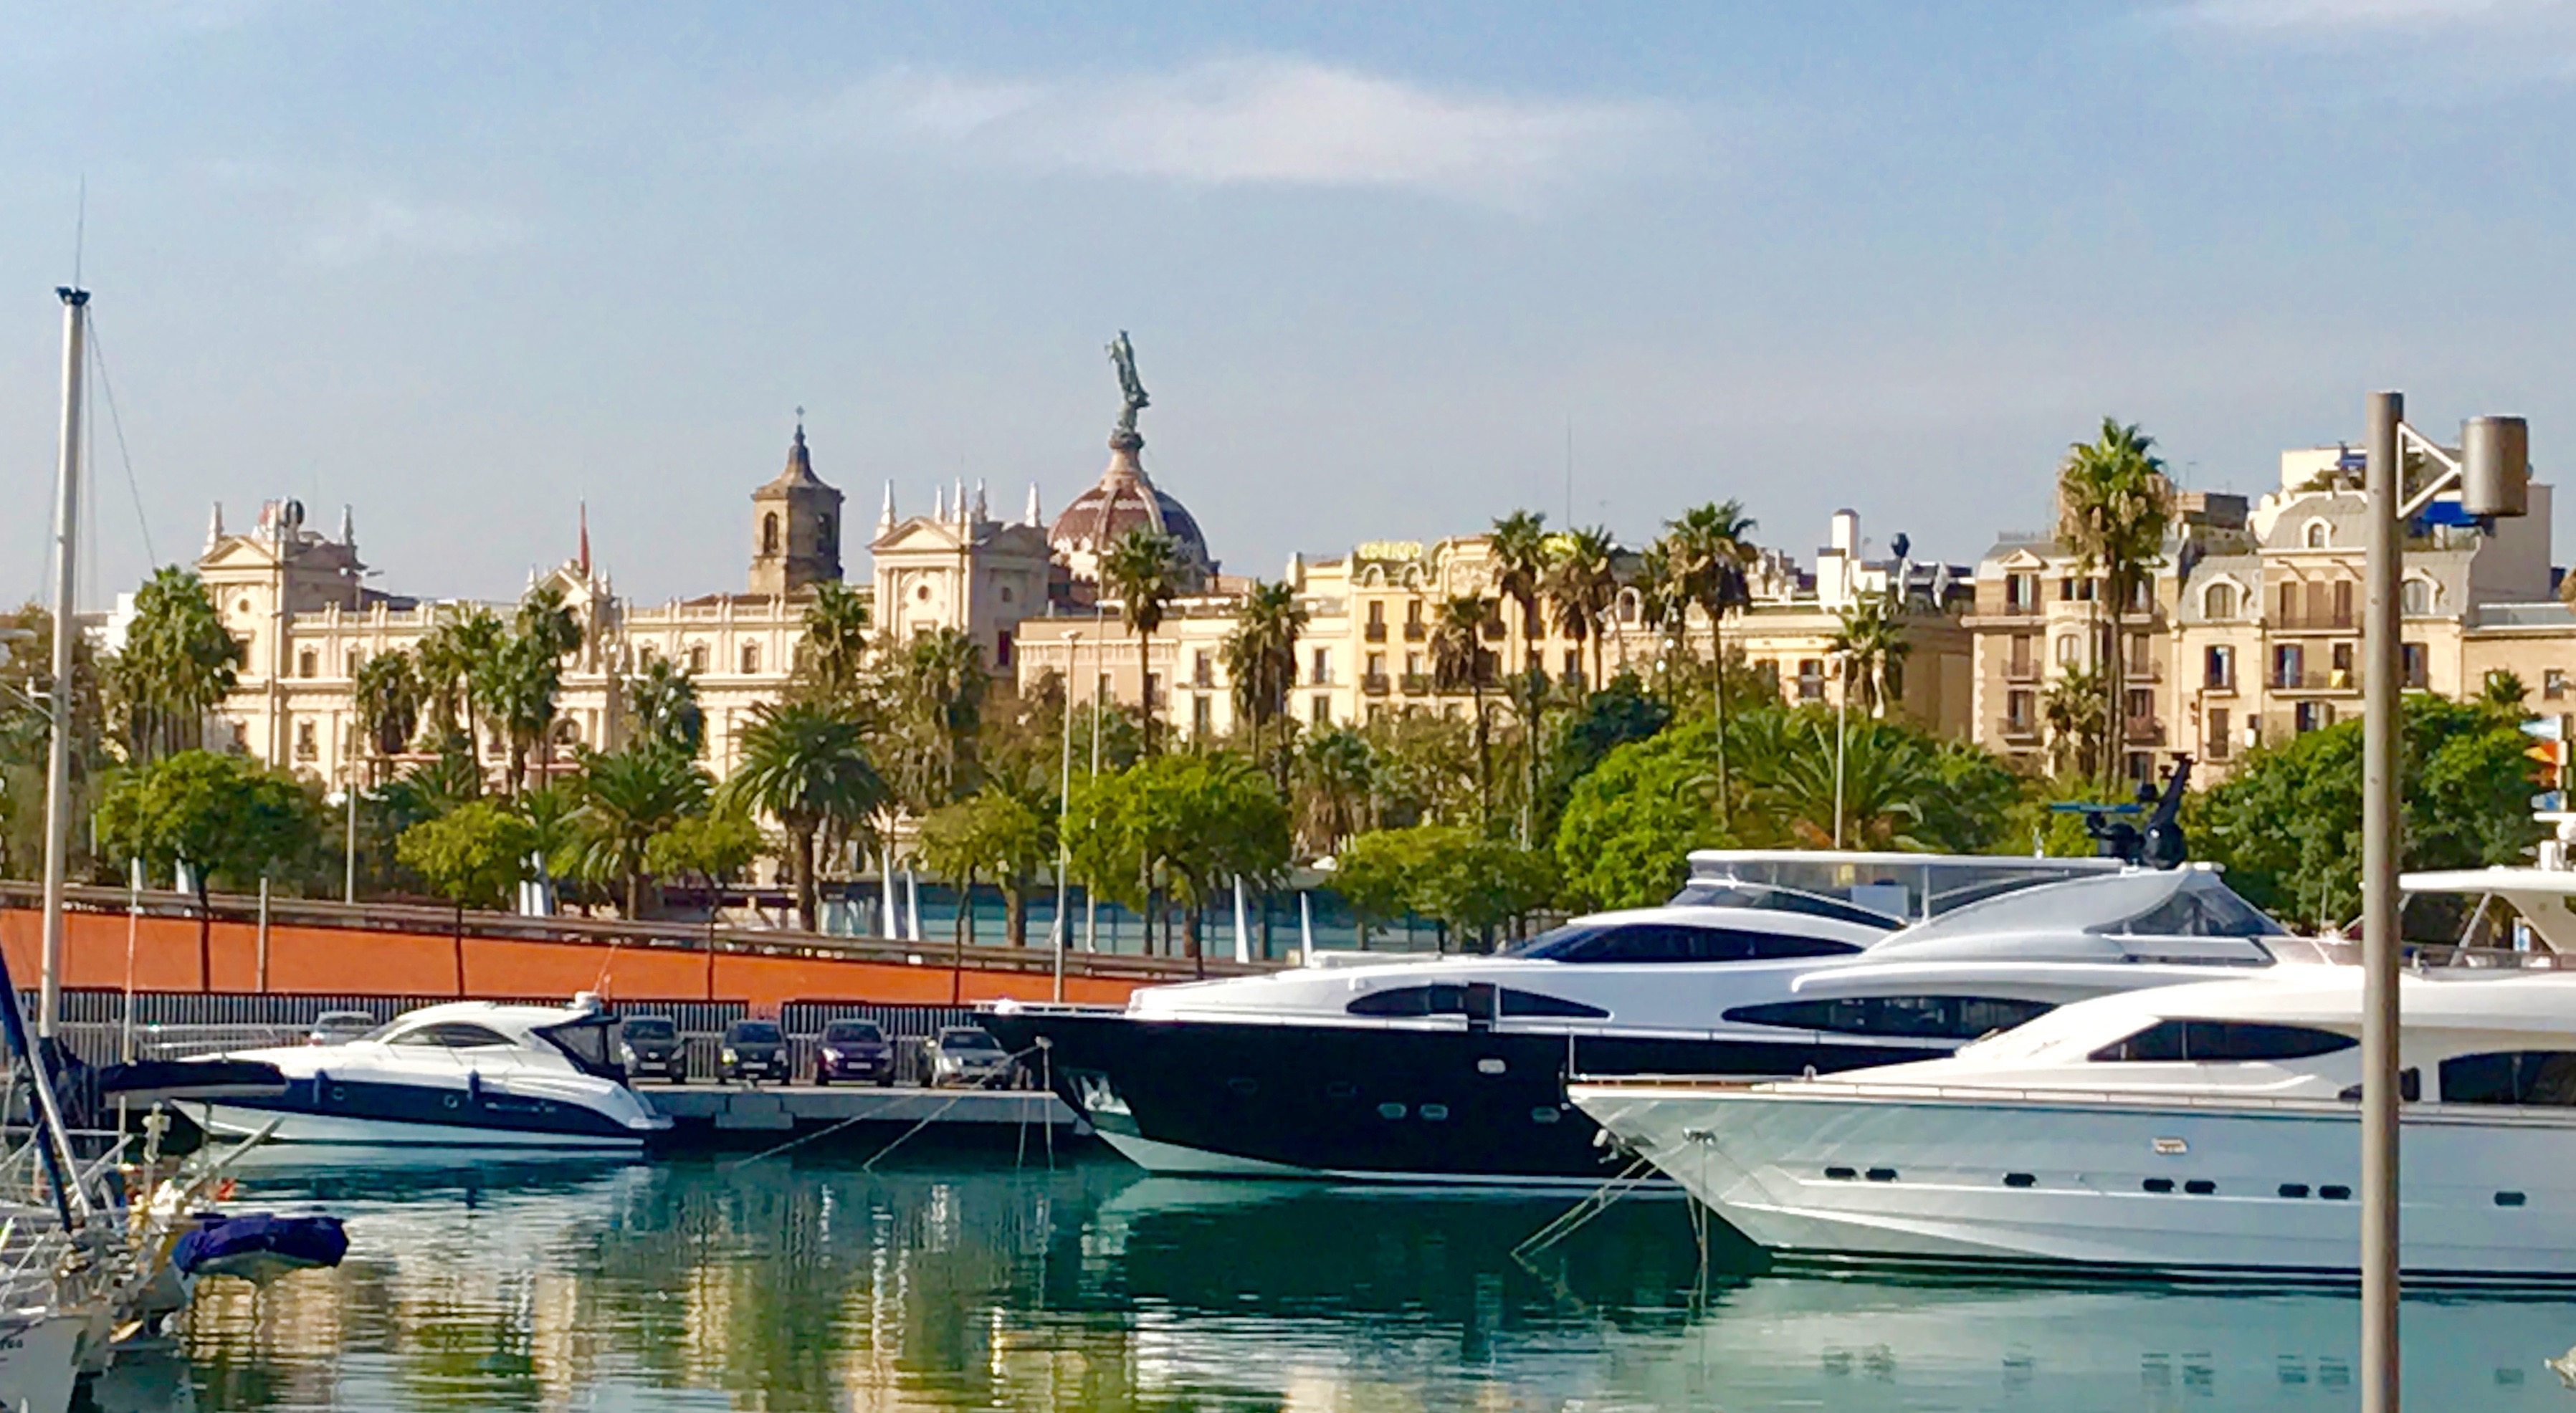 Barcelona's marina with views of the city's Moderniste architecture. Photo by Marla Norman.